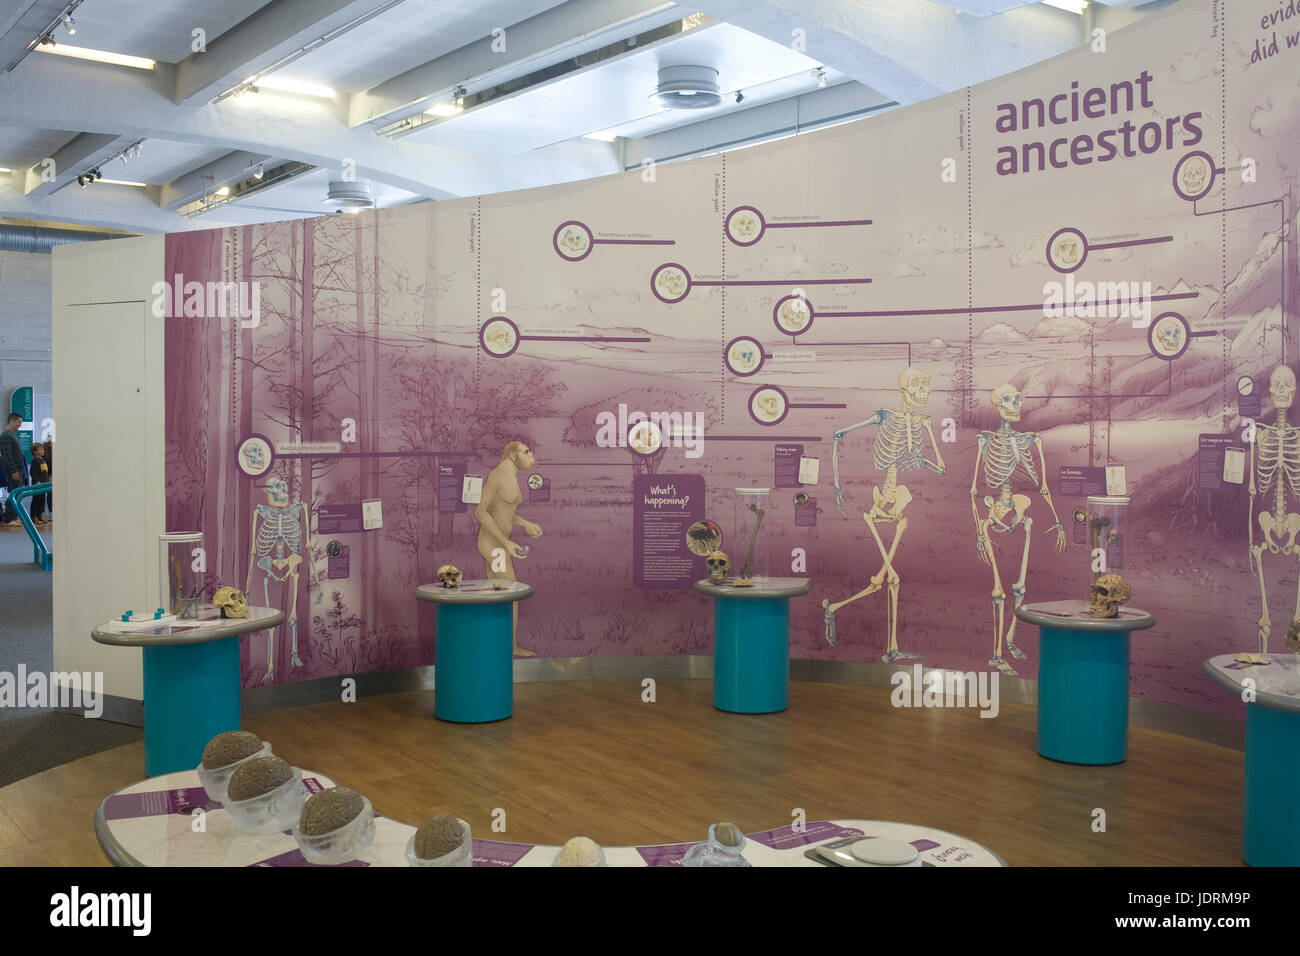 Display of ancient ancestors of human life in 'at Bristol' science museum Stock Photo